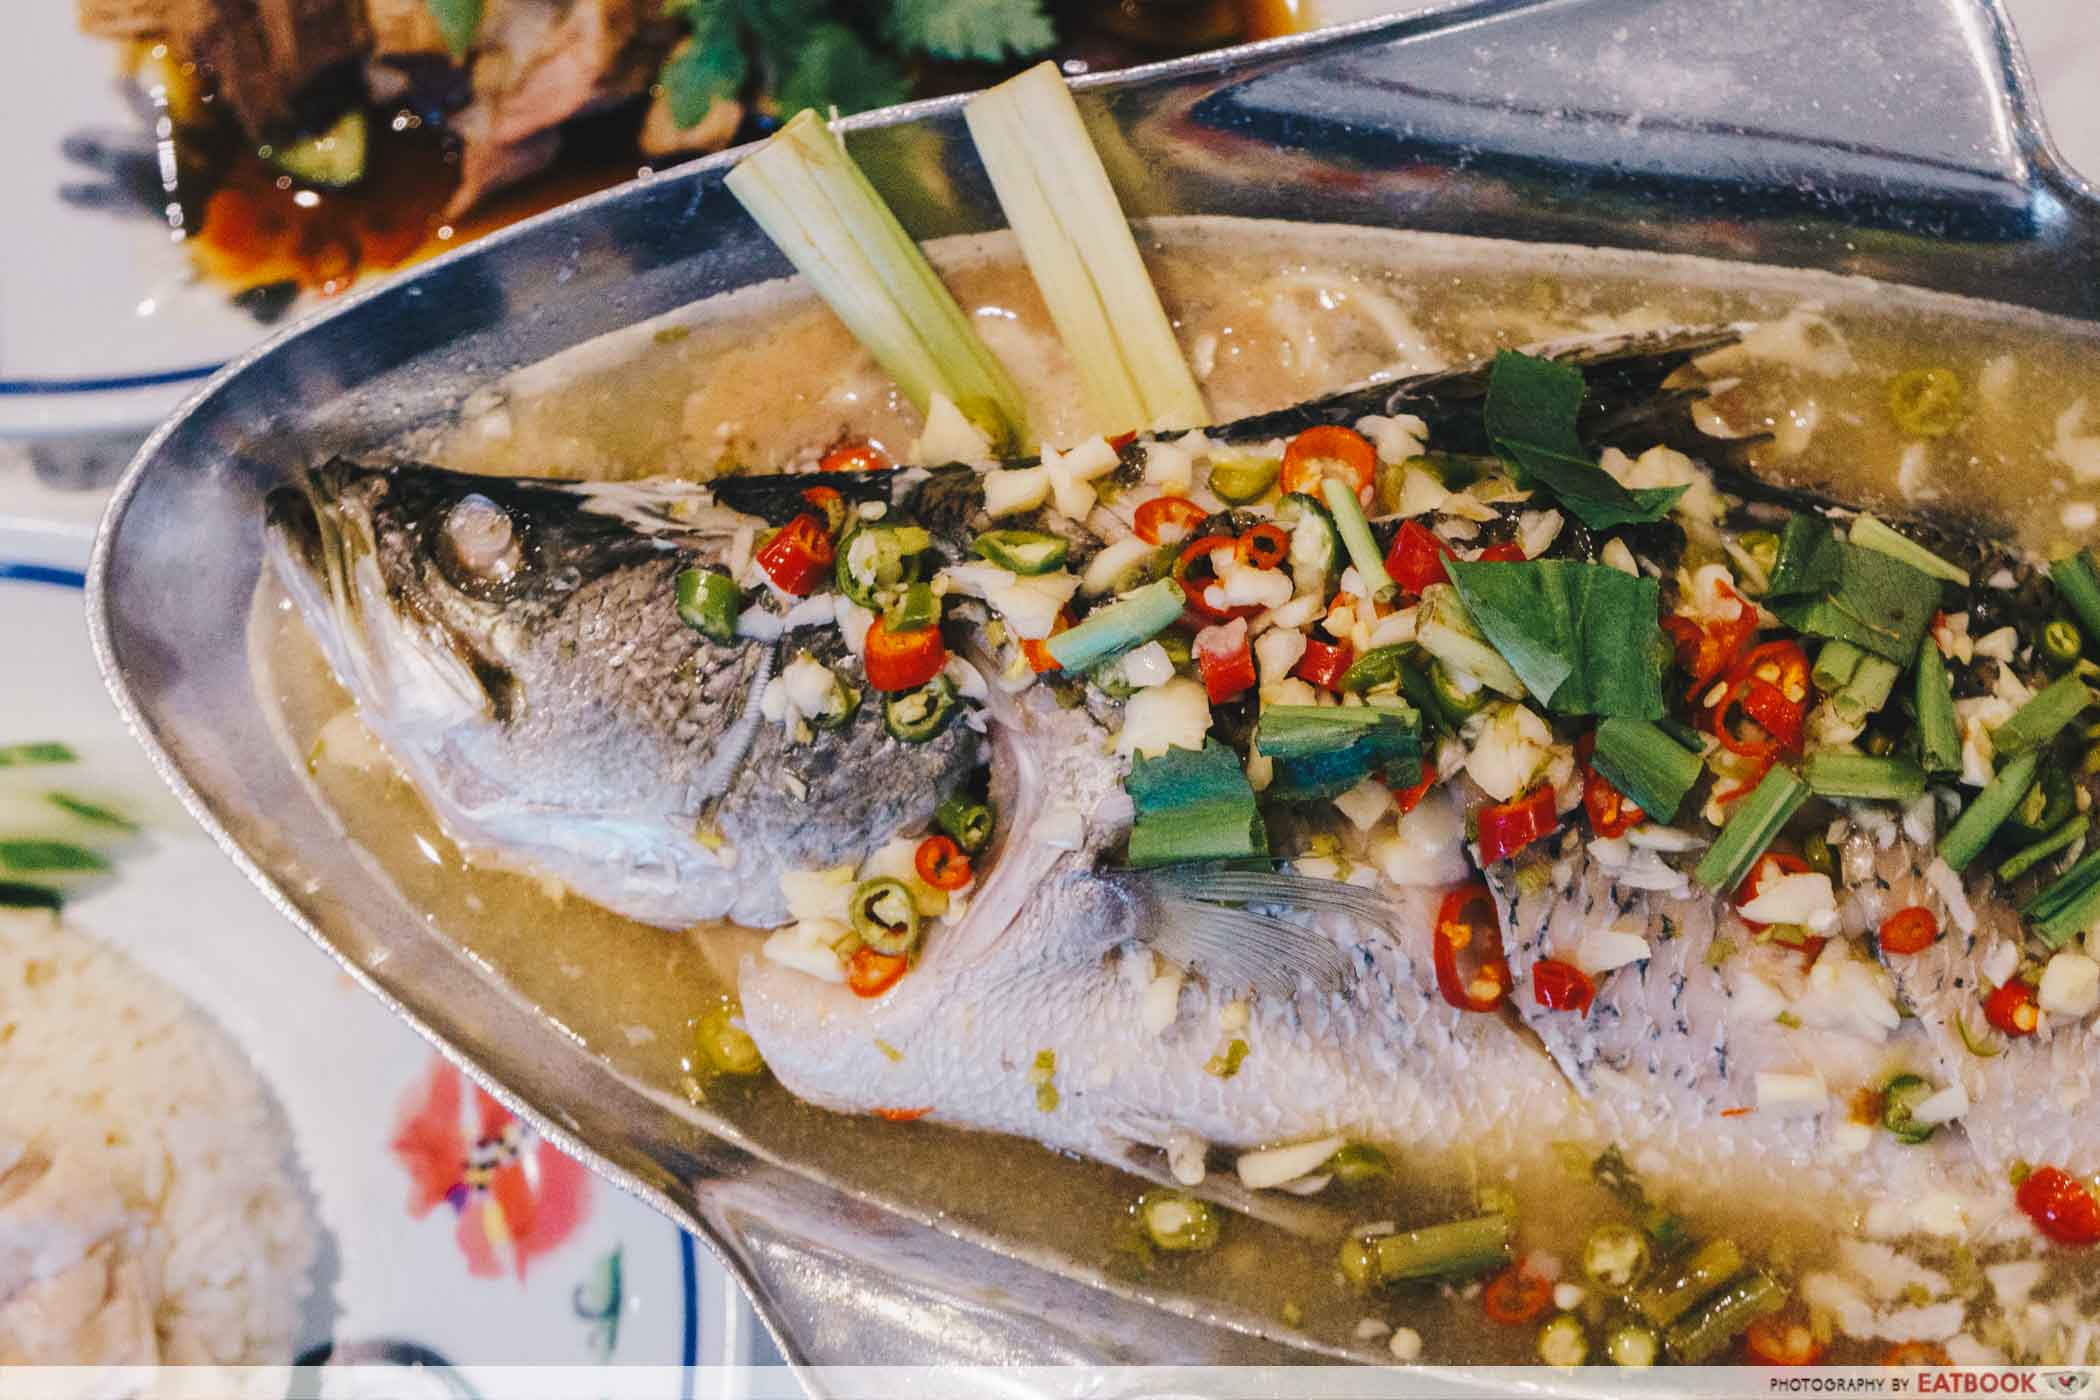 Bangkok Chicken Rice - Steamed Sea Bass with Chilli, Lime & Garlic